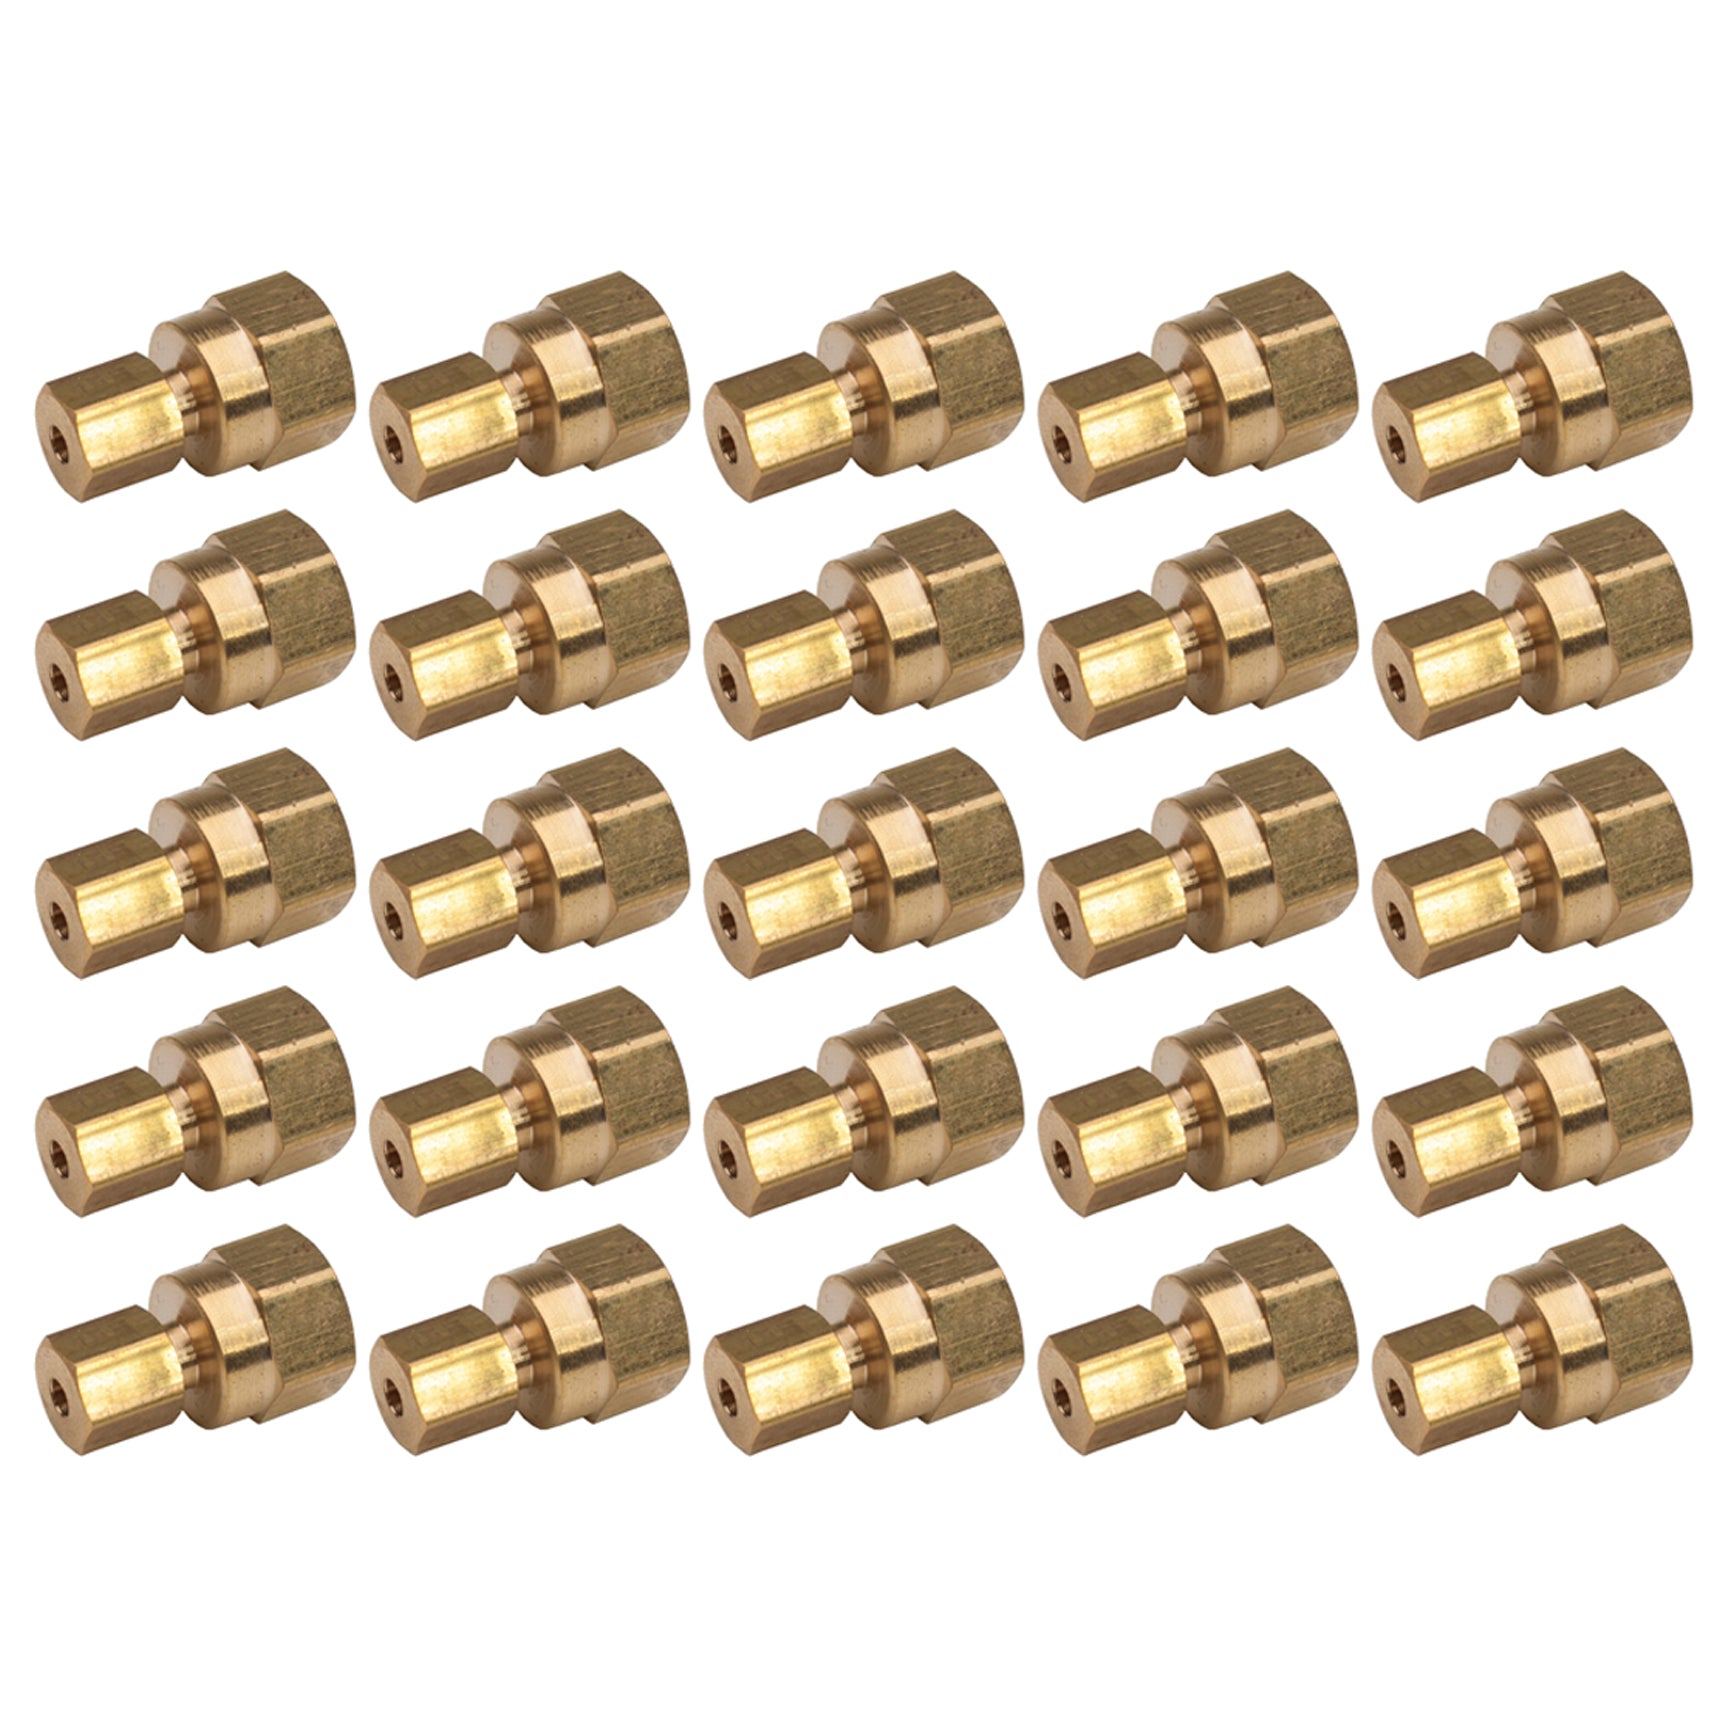 LTWFITTING Brass Compression Tube Fitting 1/8-Inch OD x 1/8-Inch Female NPT Coupler (Pack of 25 Sets)